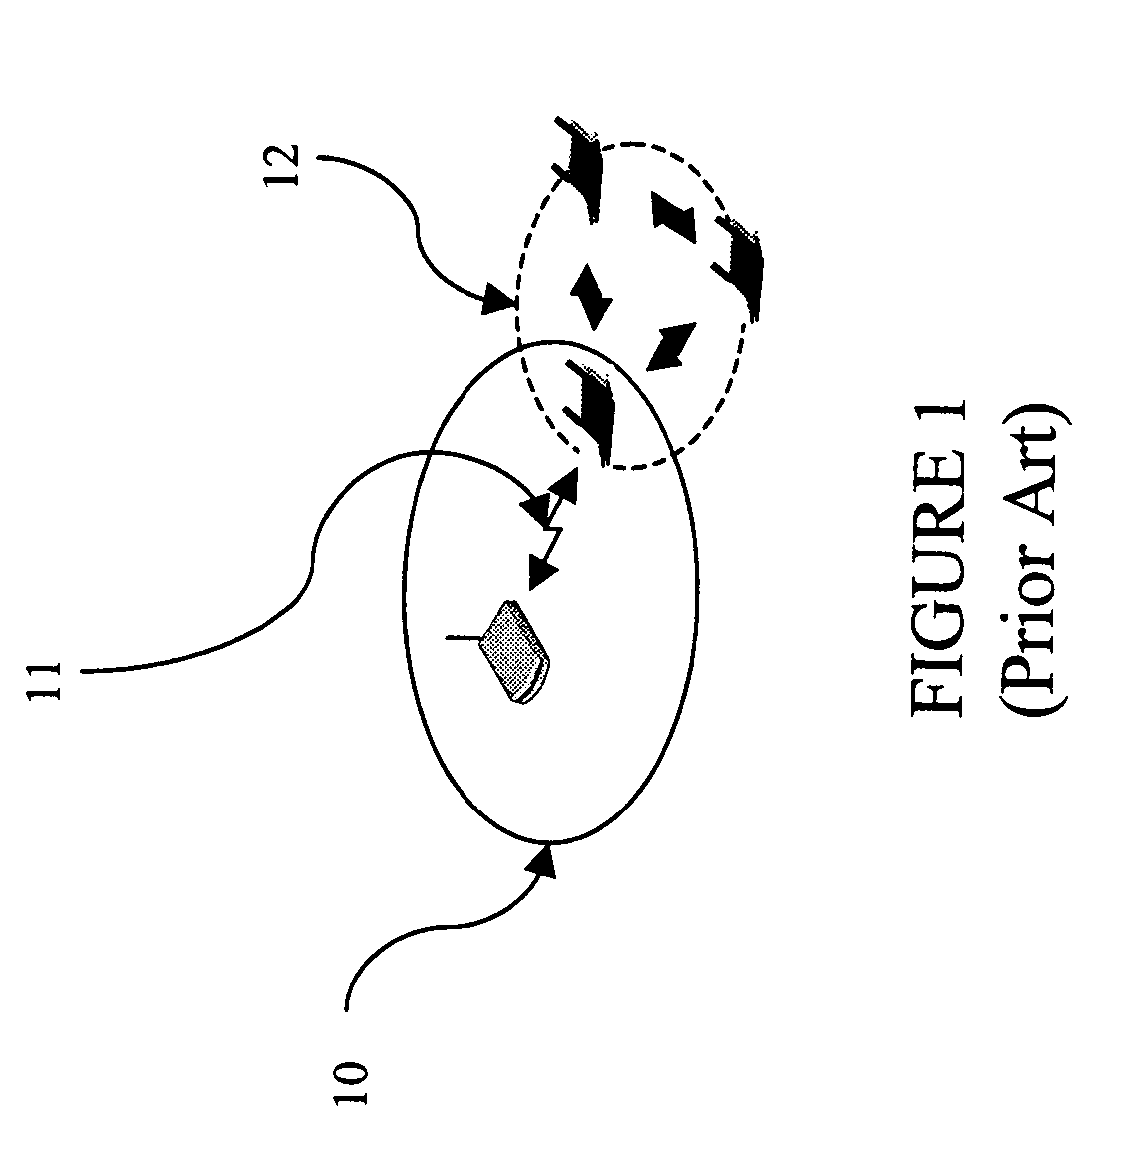 Multi-hop intelligent relaying method and apparatus for use in a frequency division duplexing based wireless access network